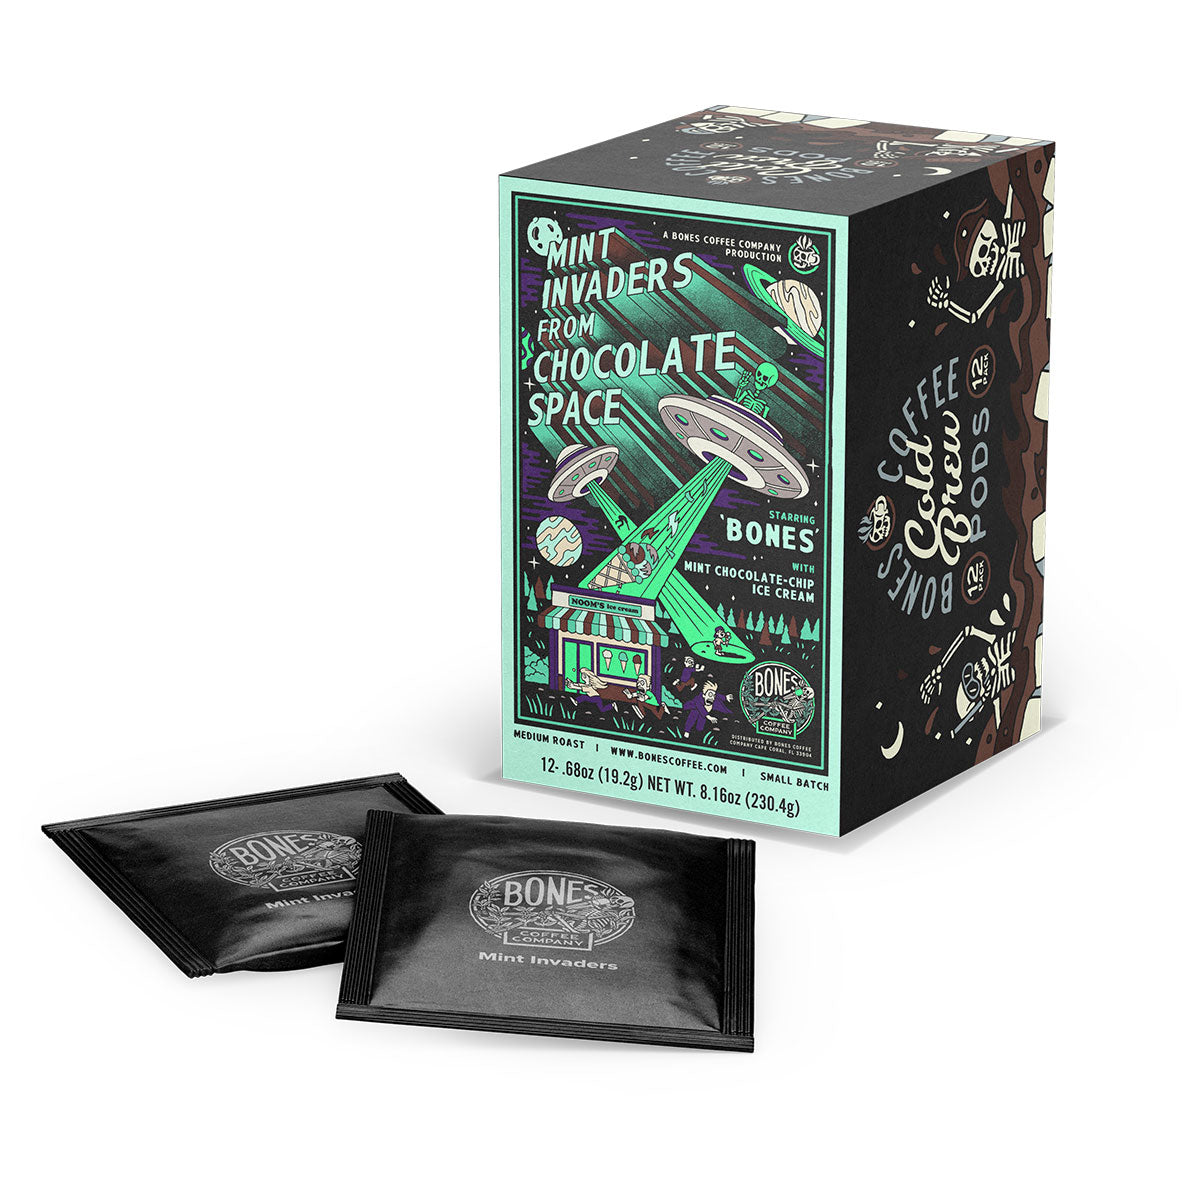 A box and cold brew pods of flavored coffee named Mint Invaders from Chocolate Space. Its flavor is mint chocolate chip ice cream, and it has green skeletons abducting ice cream and people into their UFOs on the art.